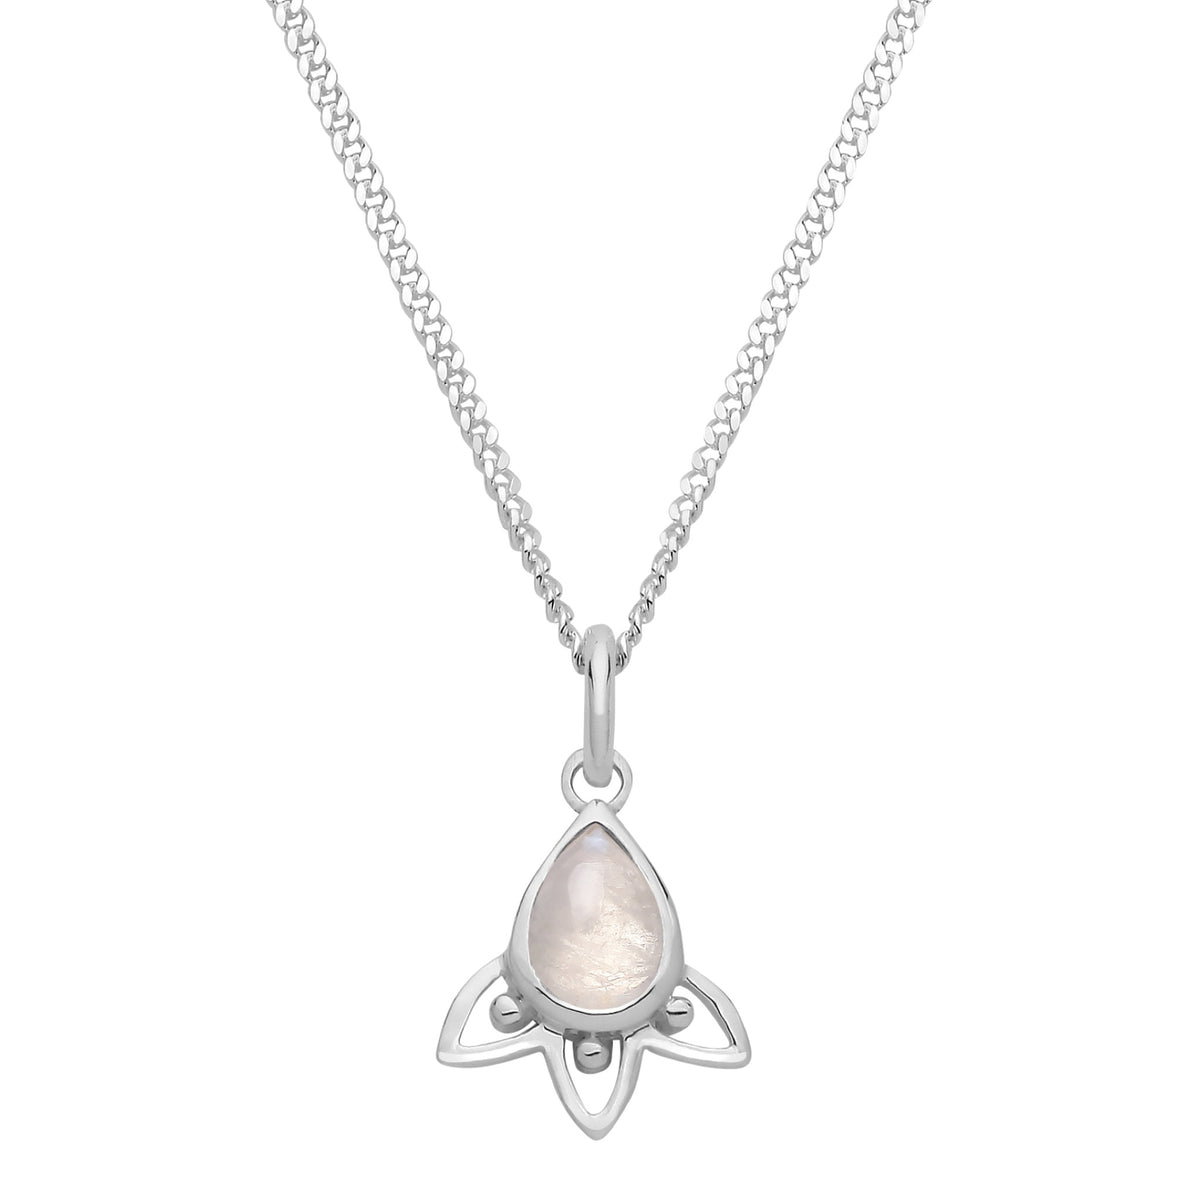 ARIA - Sterling Silver & Moonstone Necklace